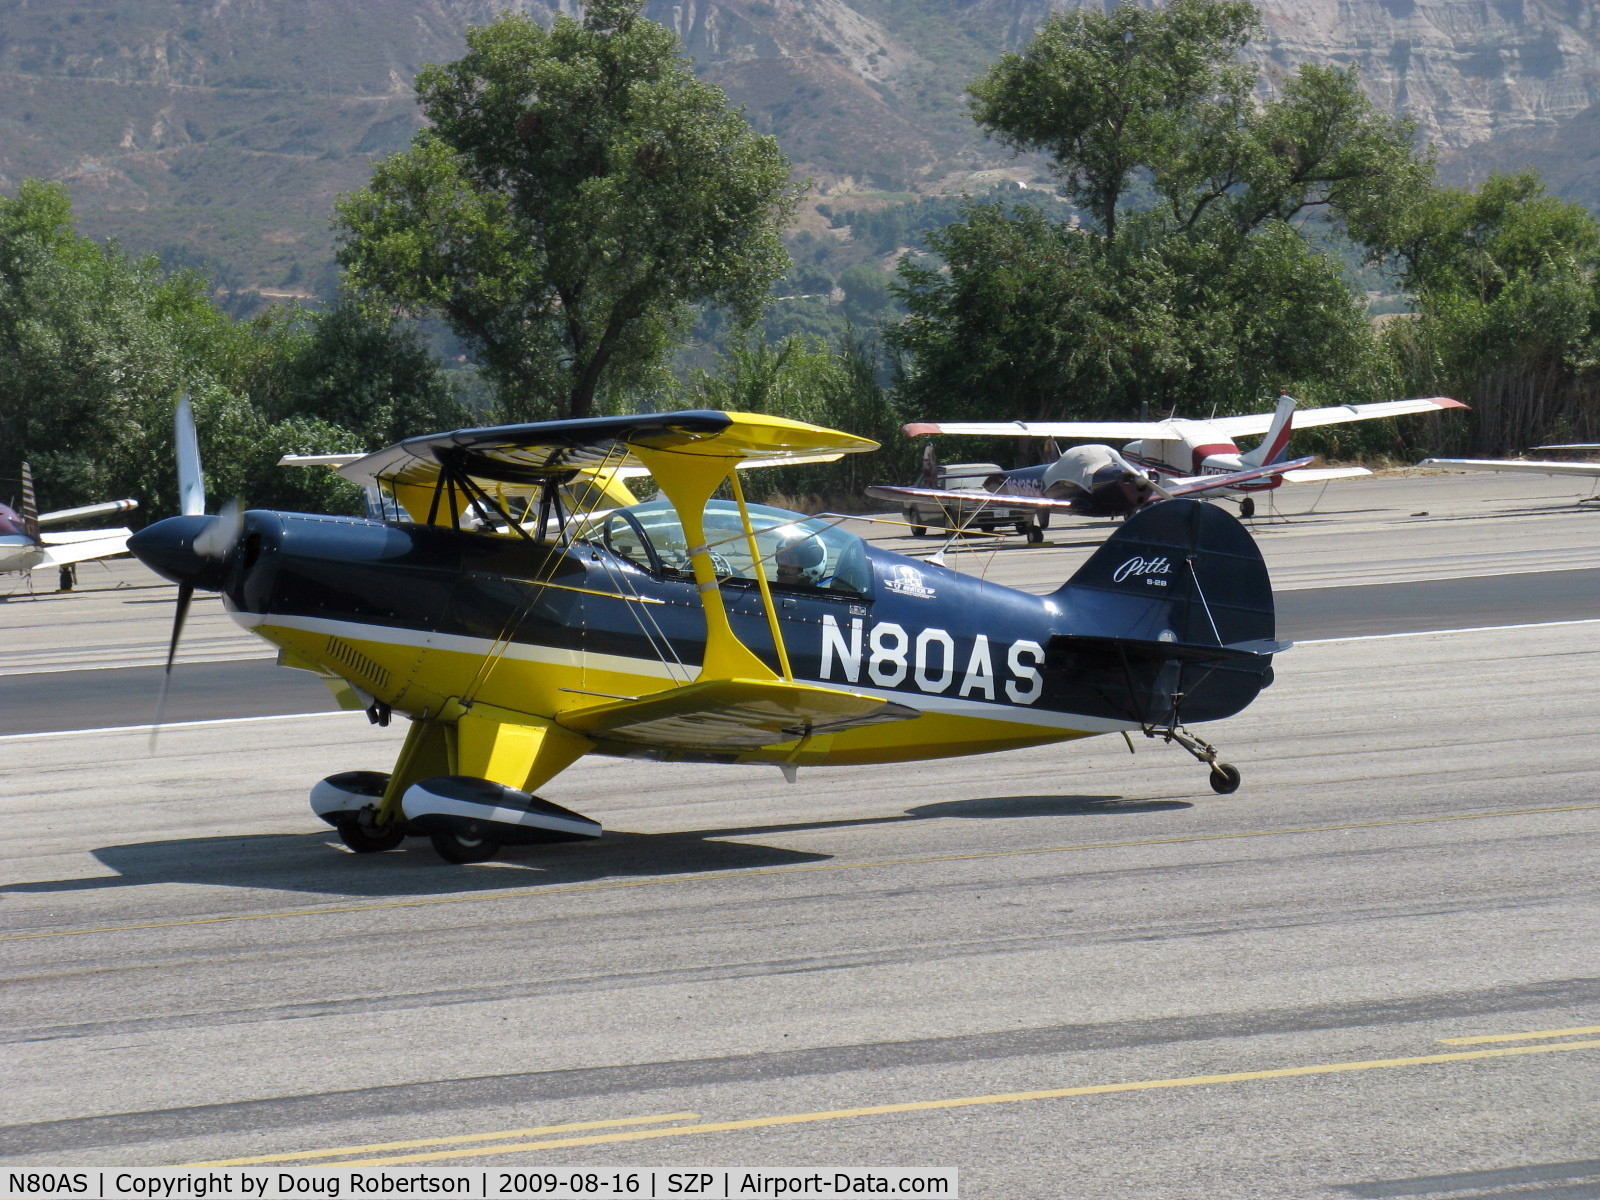 N80AS, 1992 Pitts S-2B Special C/N 5244, 1992 Pitts Aerobatics S-2B, Lycoming AEIO-540, S-turns taxi to Rwy 22t